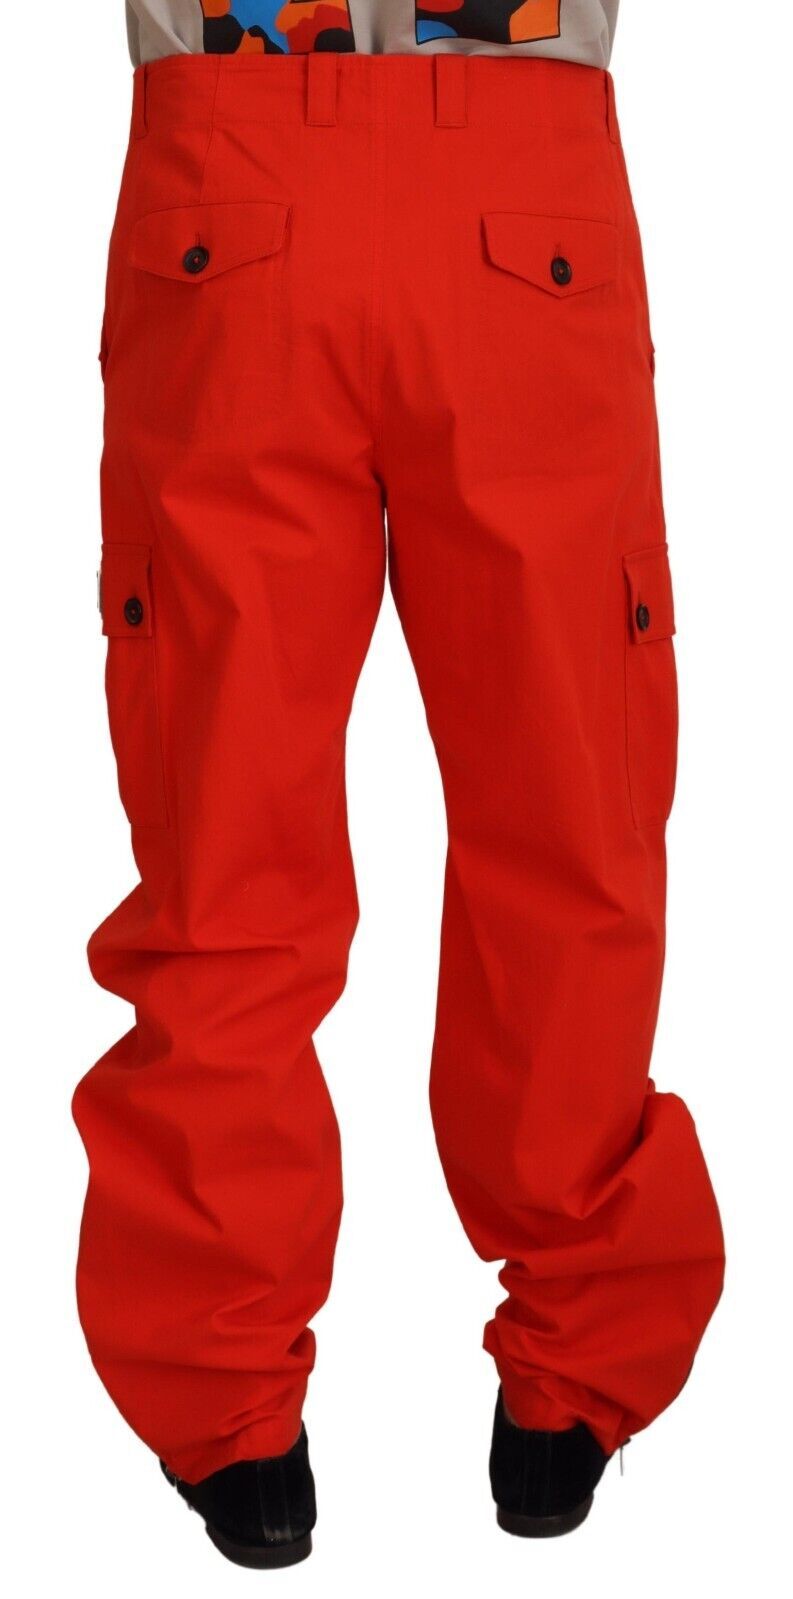 Elegant Red Cotton Blend Trousers